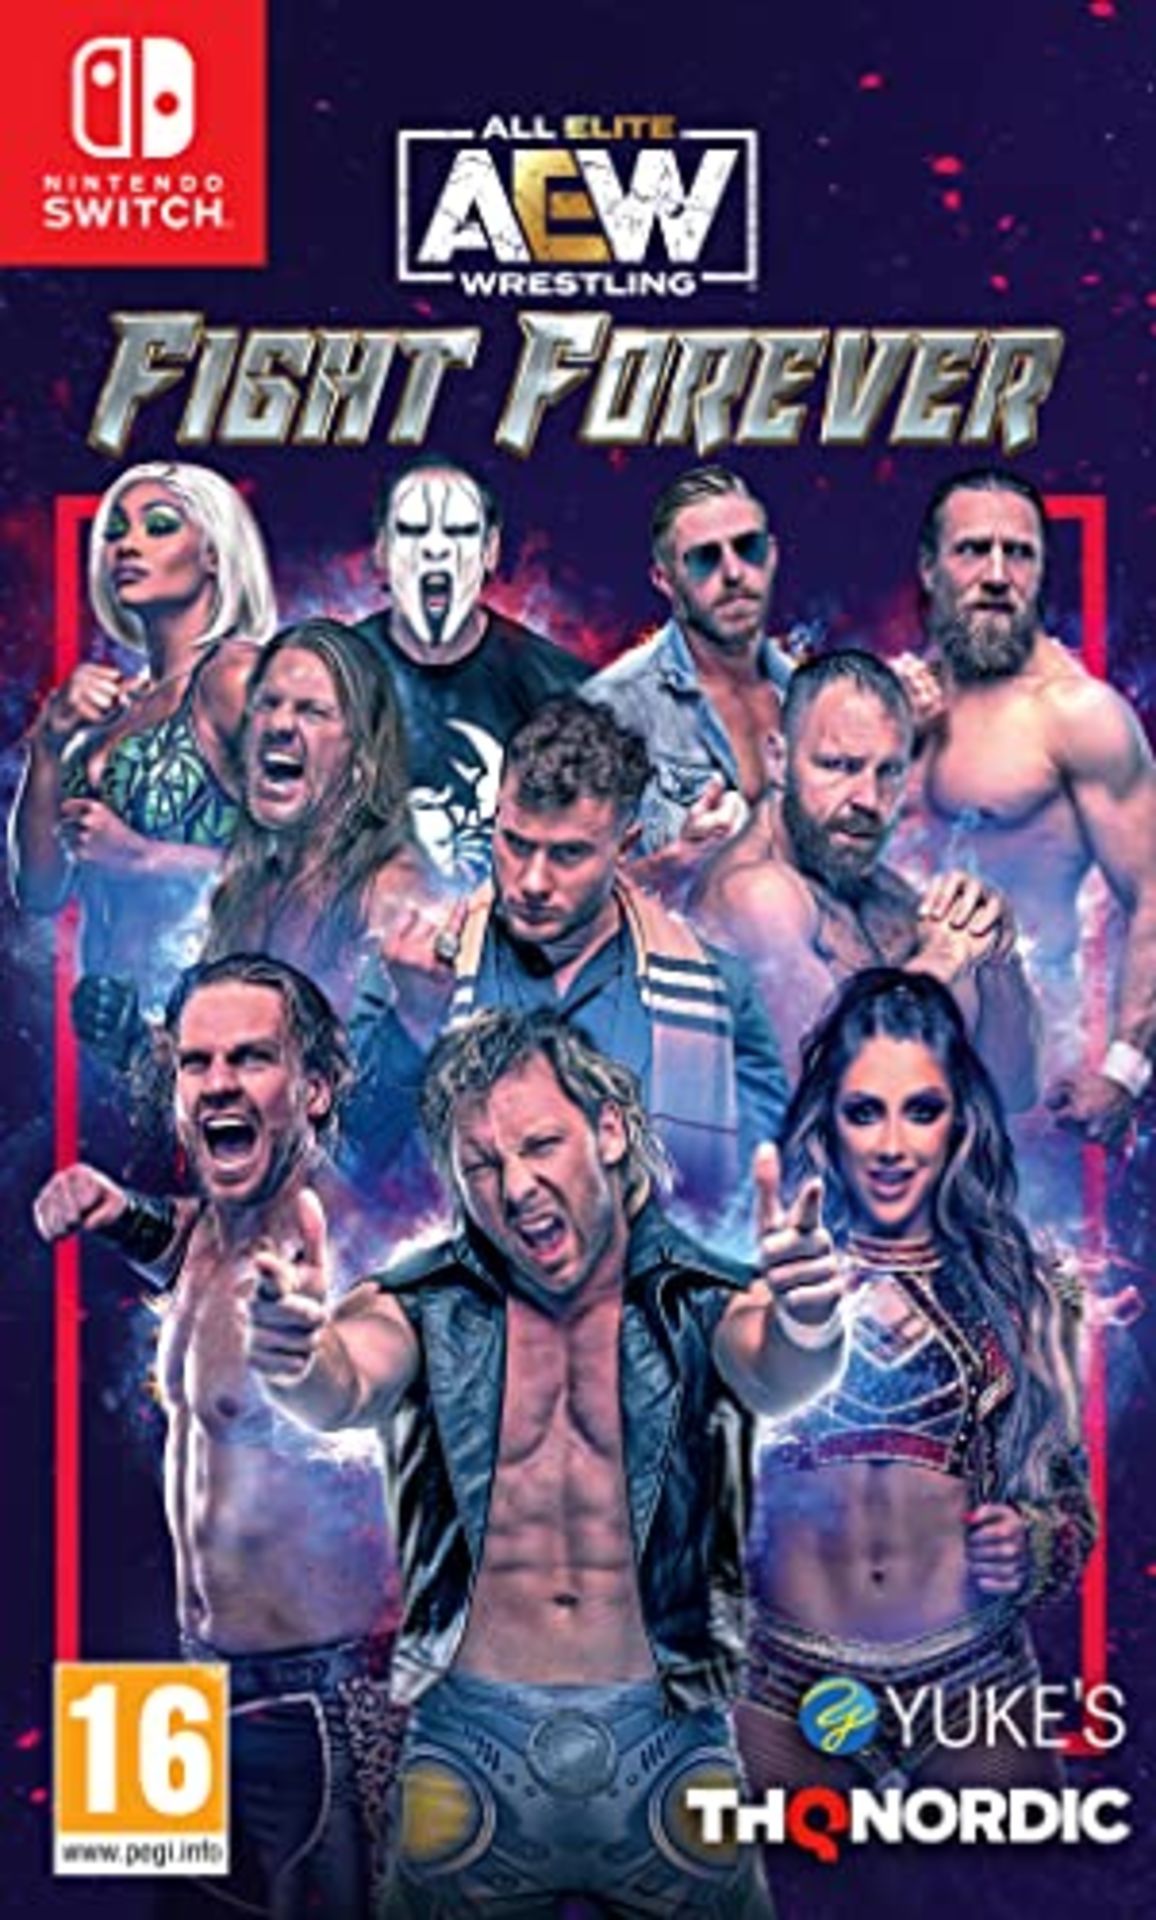 AEW: Fight Forever is a video game available on the Nintendo Switch platform. - Image 4 of 6